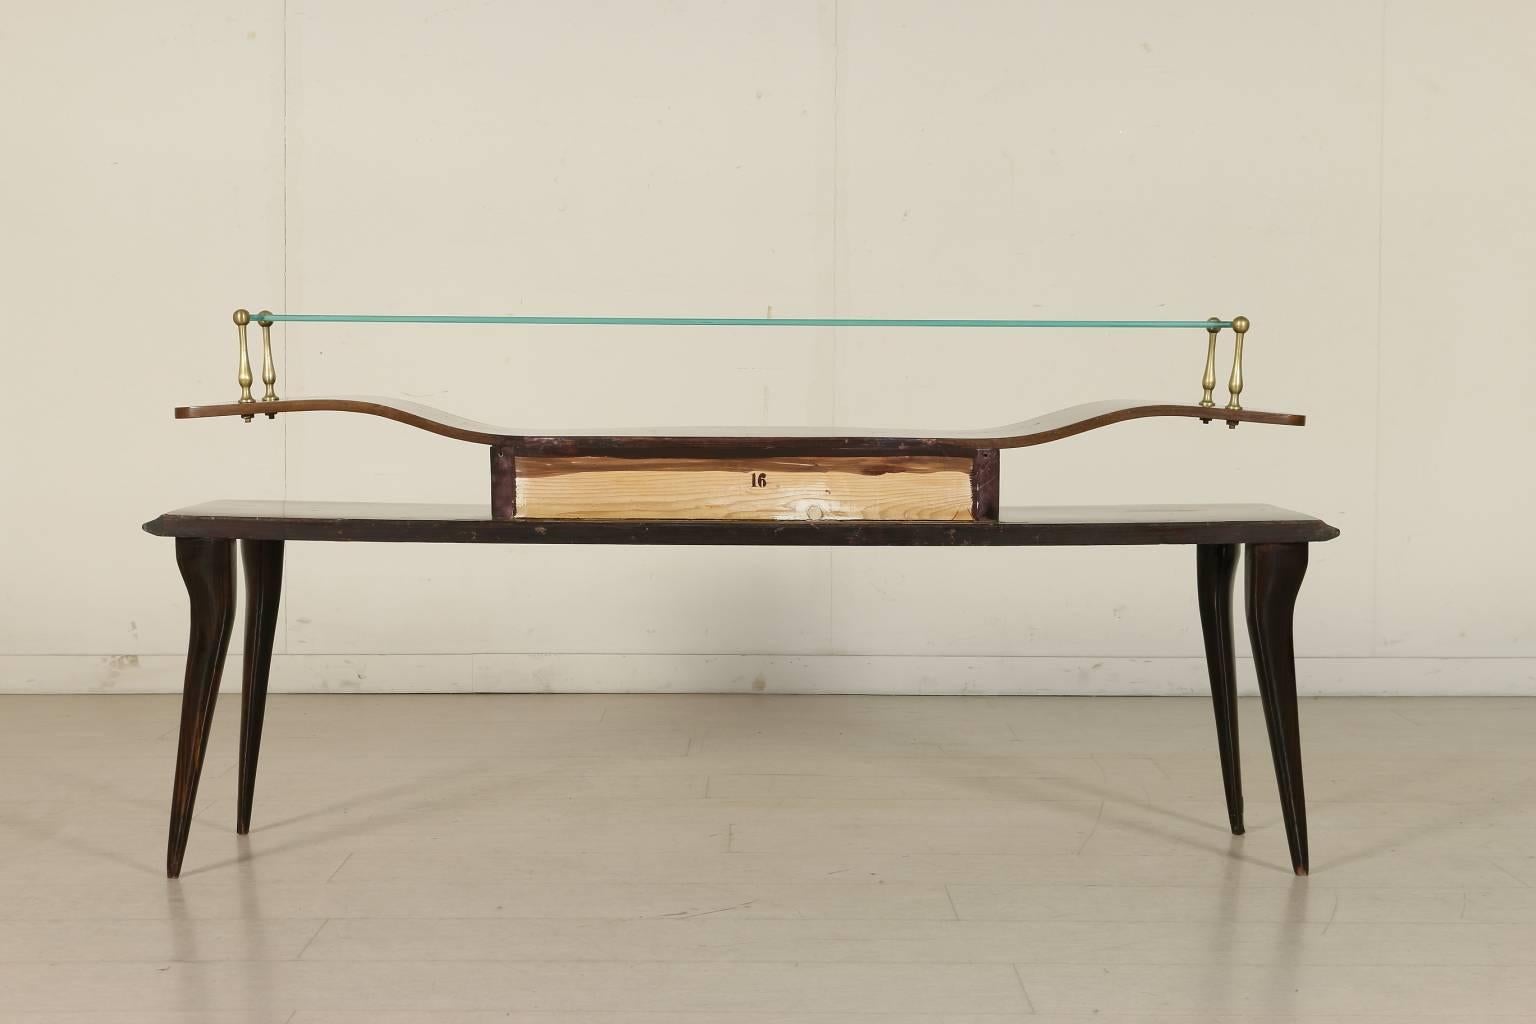 A graceful console, rosewood veneer, ebony stained wood, glass, brass. Manufactured in Italy, 1950s.